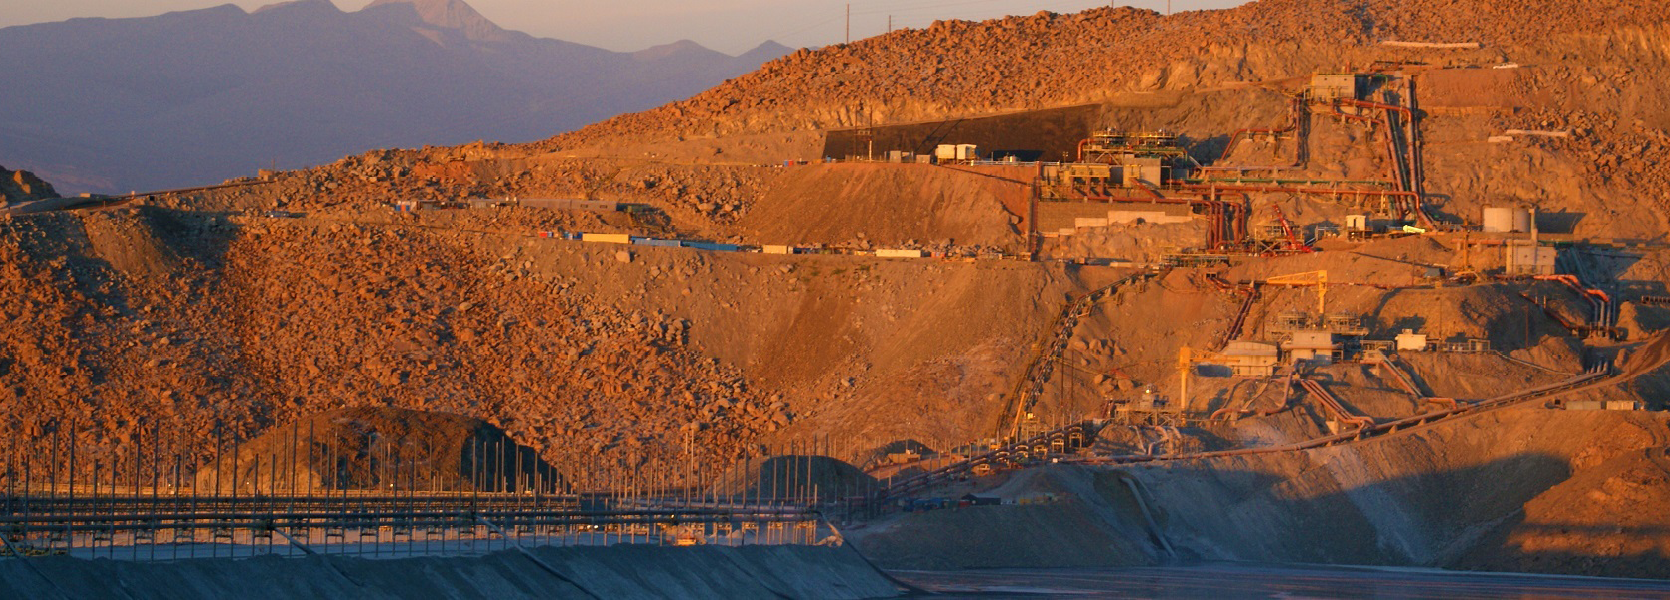 Image: Cerro Verde Project: Tailings distribution and water reclaim system